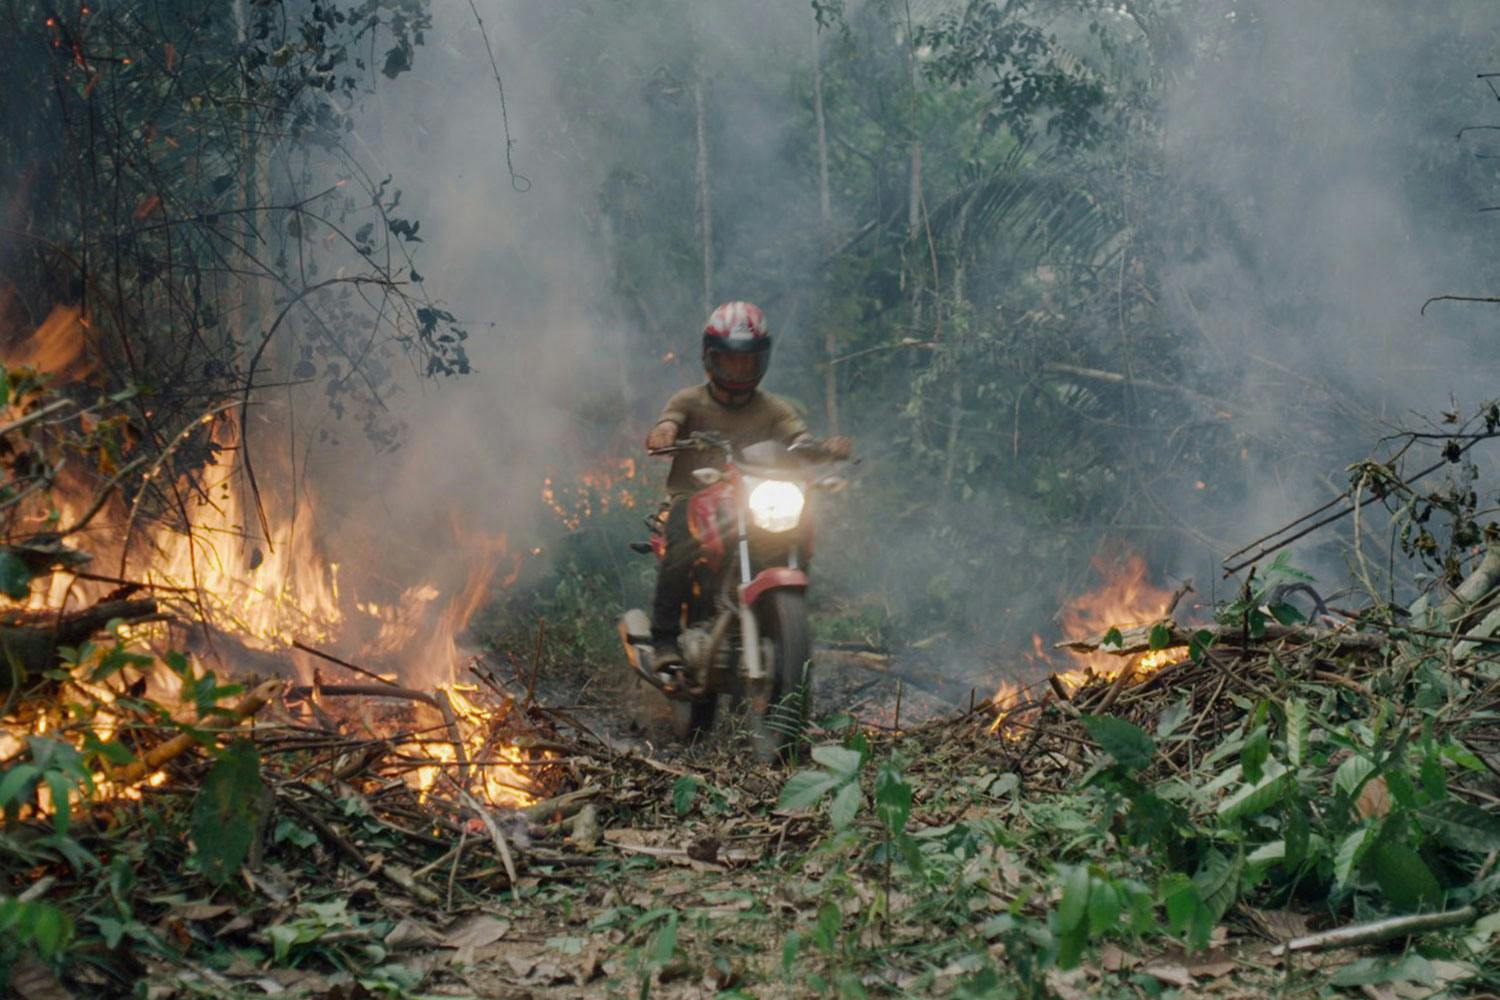 A helmeted man rides a red motorbike through a smoky, burning patch of the Amazon Rainforest.